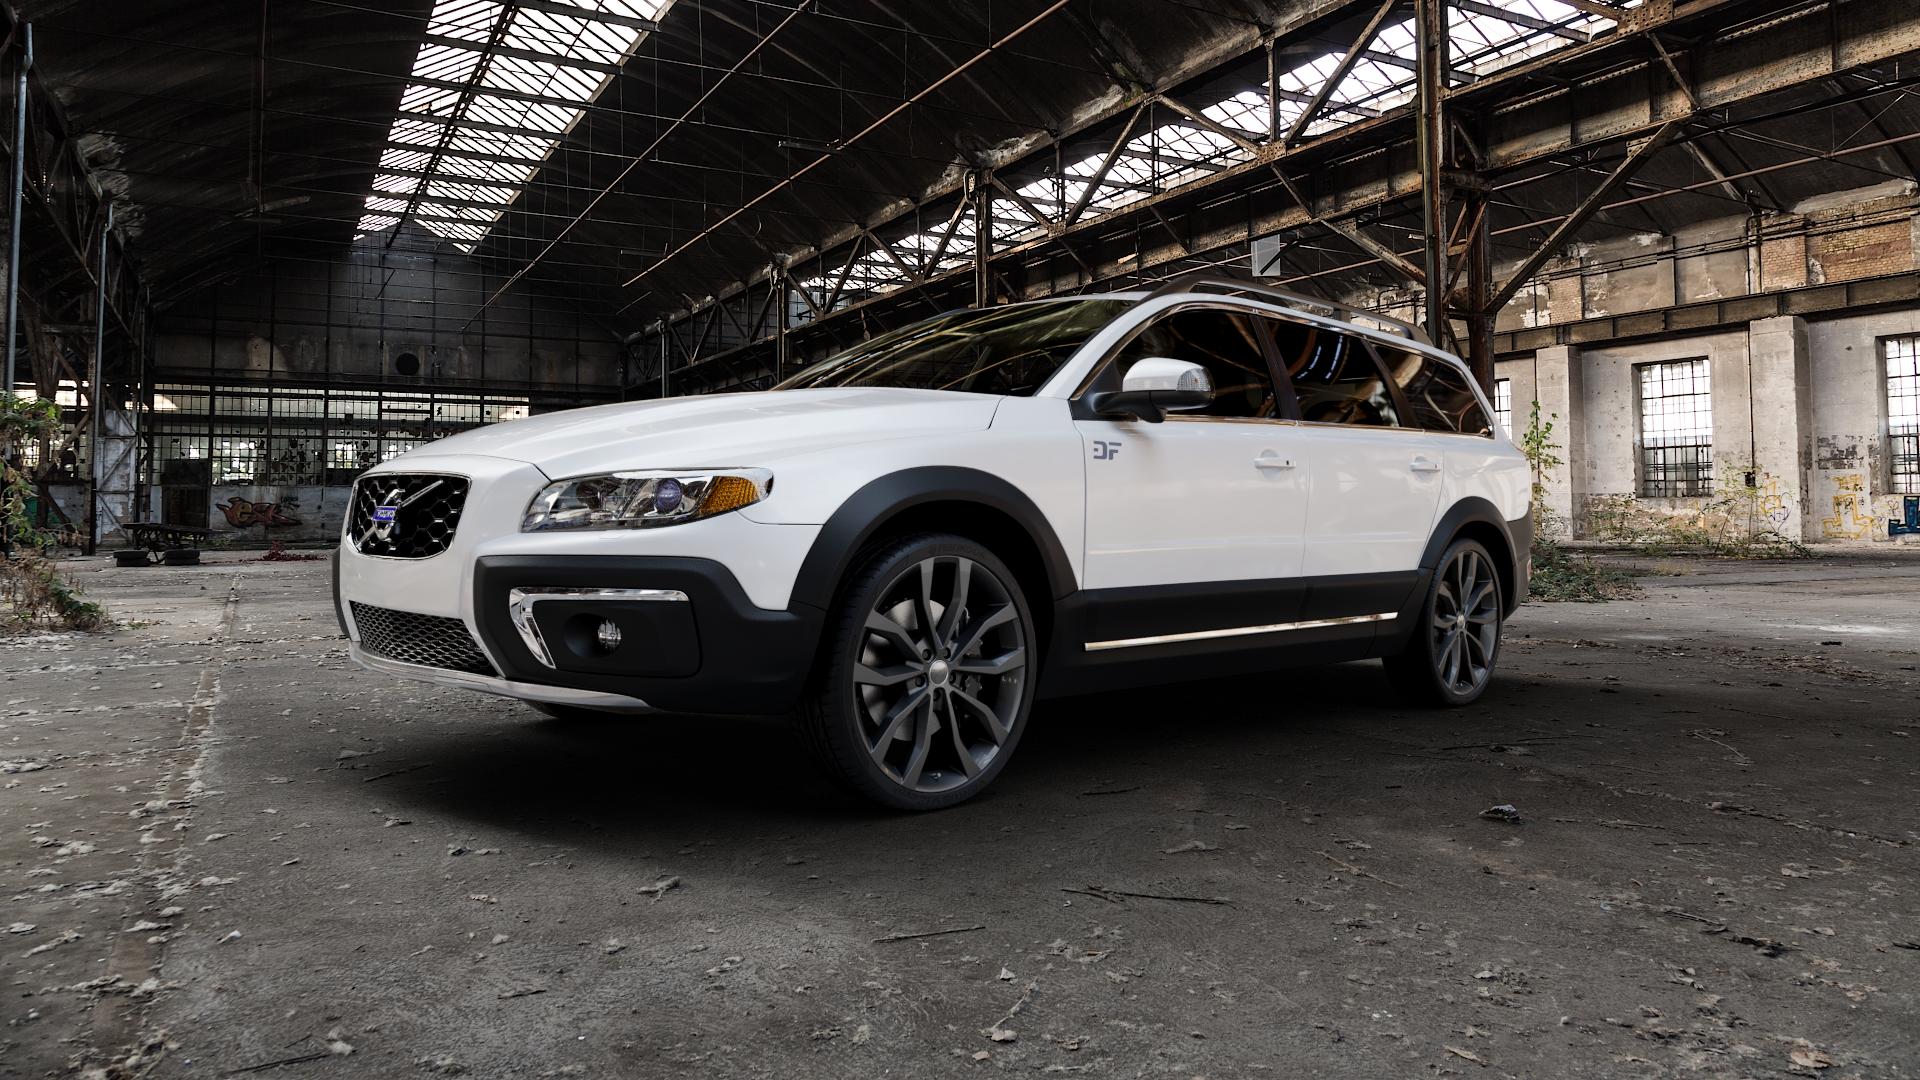 Volvo XC70 II Type B 2,4l D4 AWD 133kW (181 hp) Wheels and Tyre Packages |  velonity.com